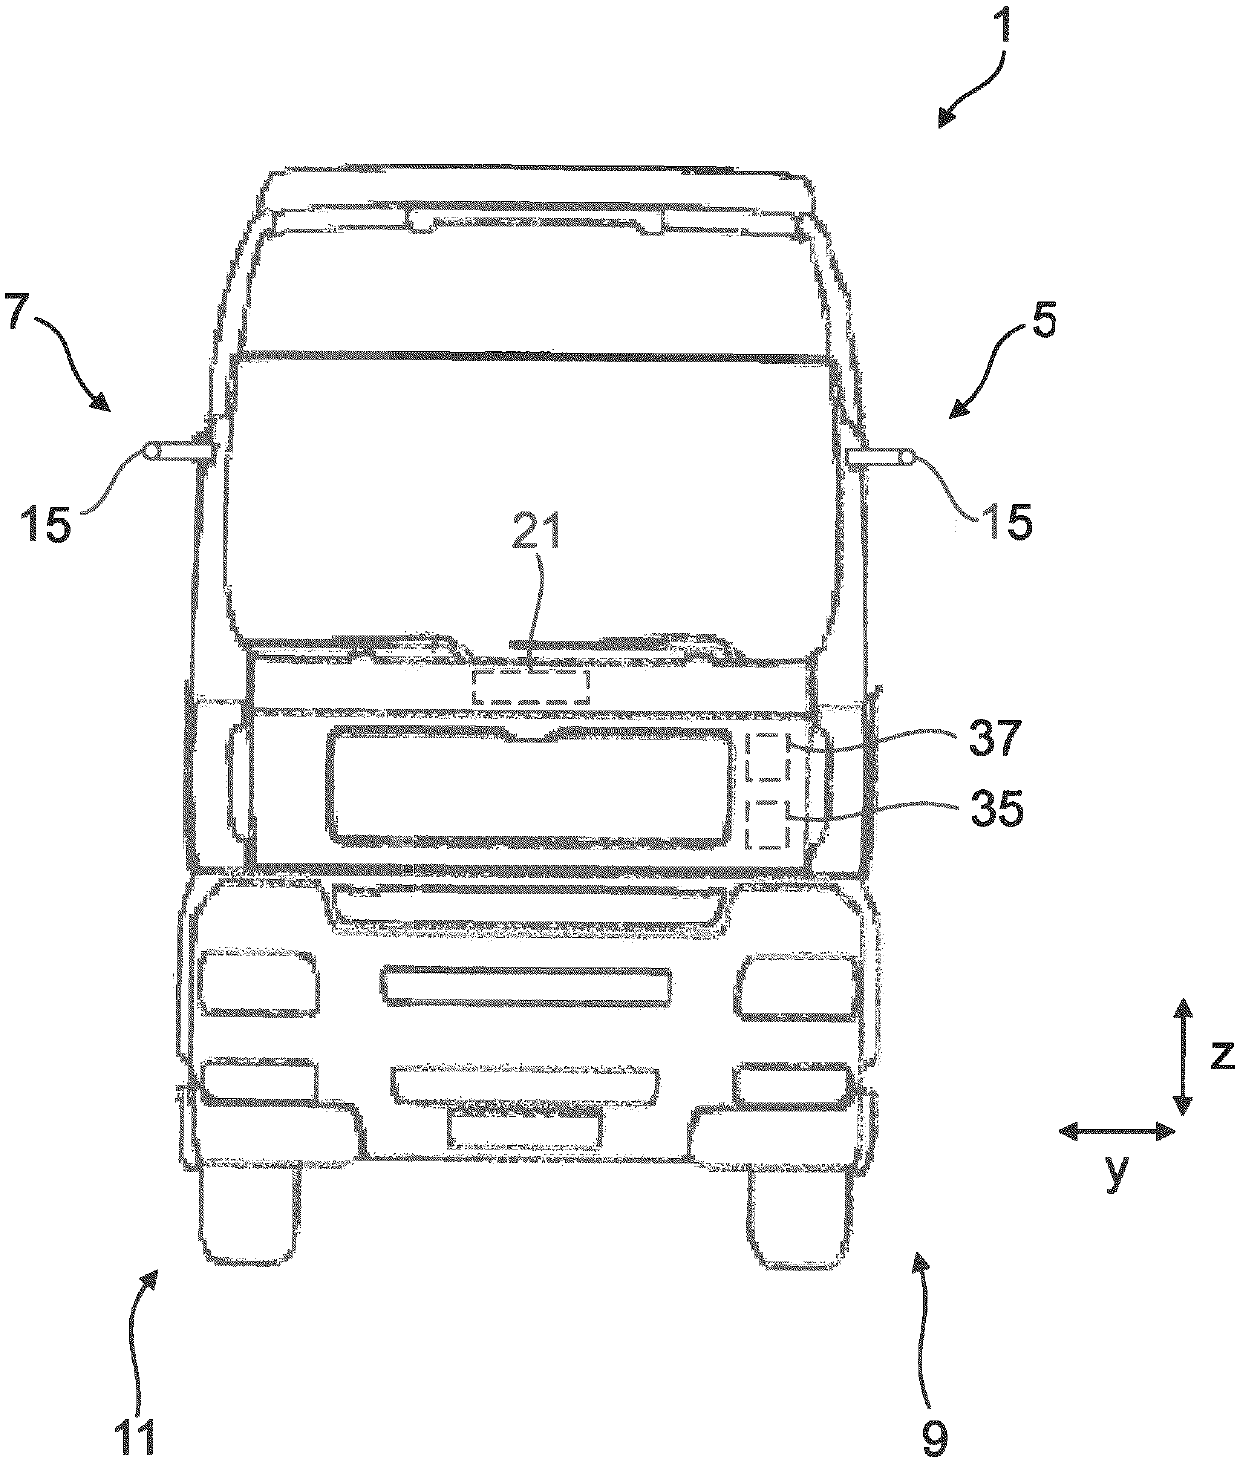 Method and device to support driver of vehicle combination, in particular commercial vehicle combination